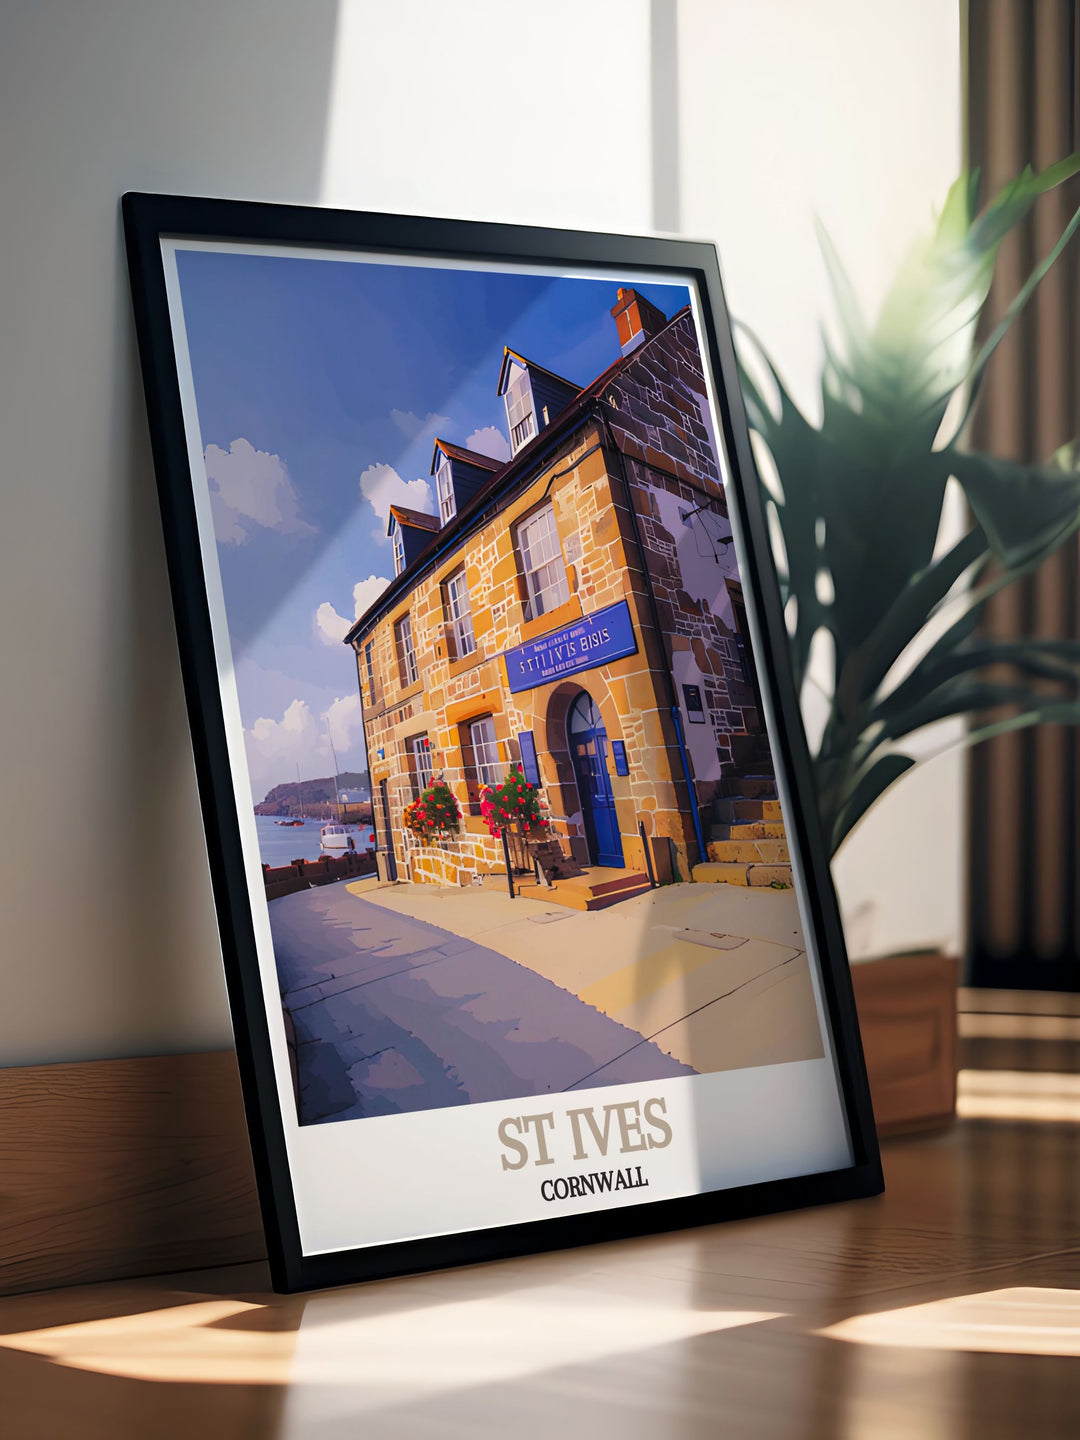 St Ives Museum is elegantly illustrated in this poster, celebrating the unique blend of history and culture that defines this picturesque seaside town.